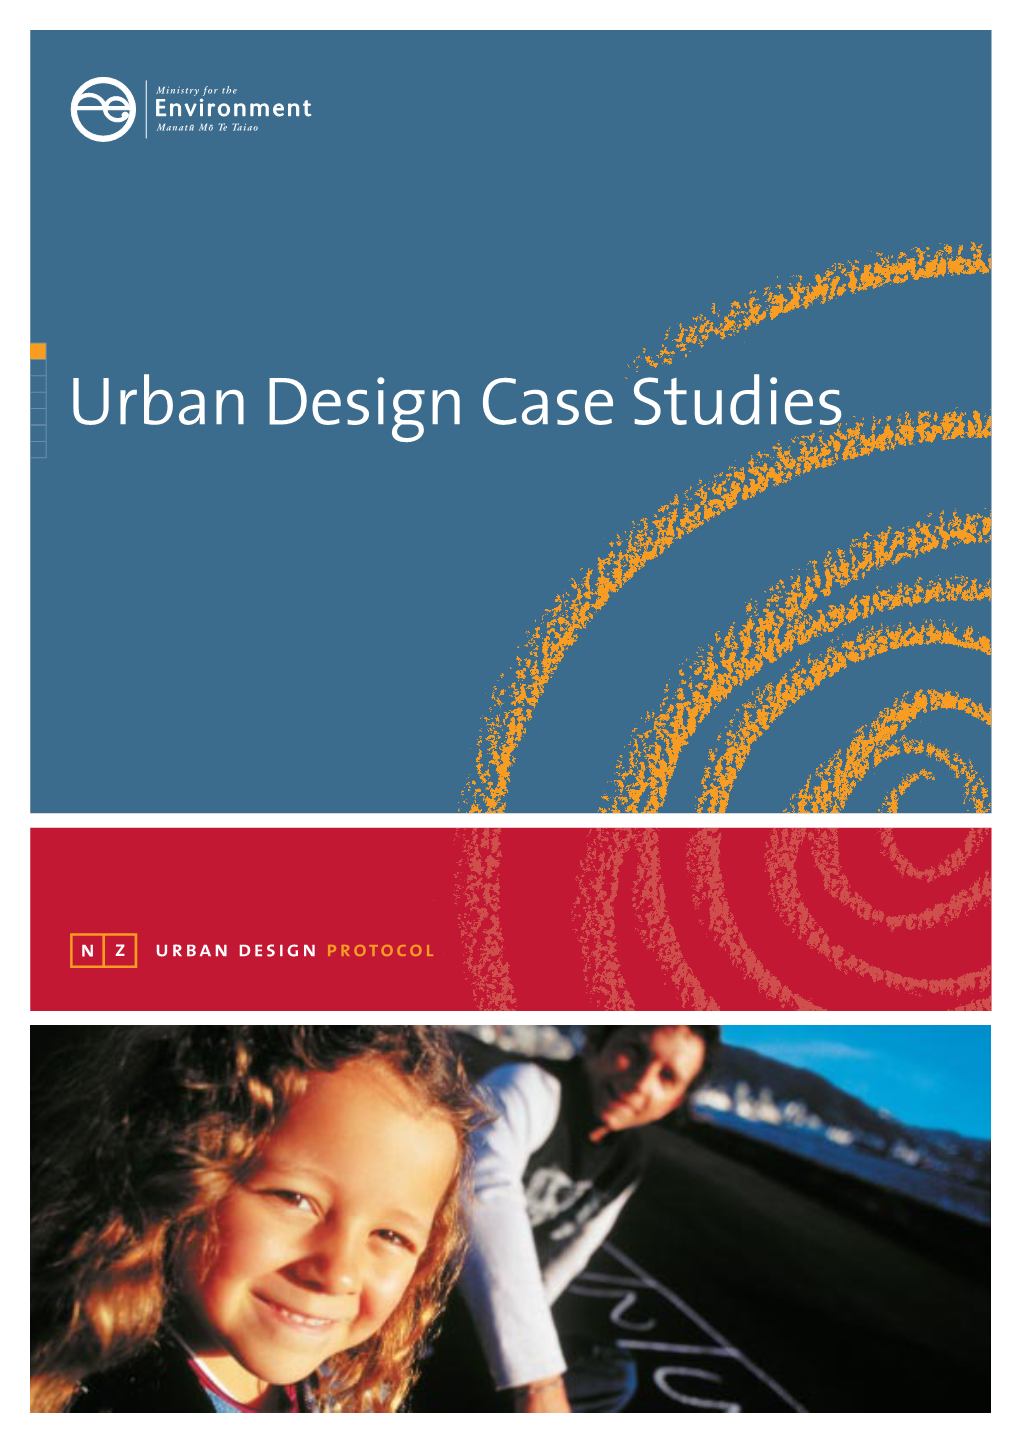 Urban Design Case Studies These Case Studies Were Funded As a Joint Project by the Ministry for the Environment, Auckland Regional Council and Waitakere City Council